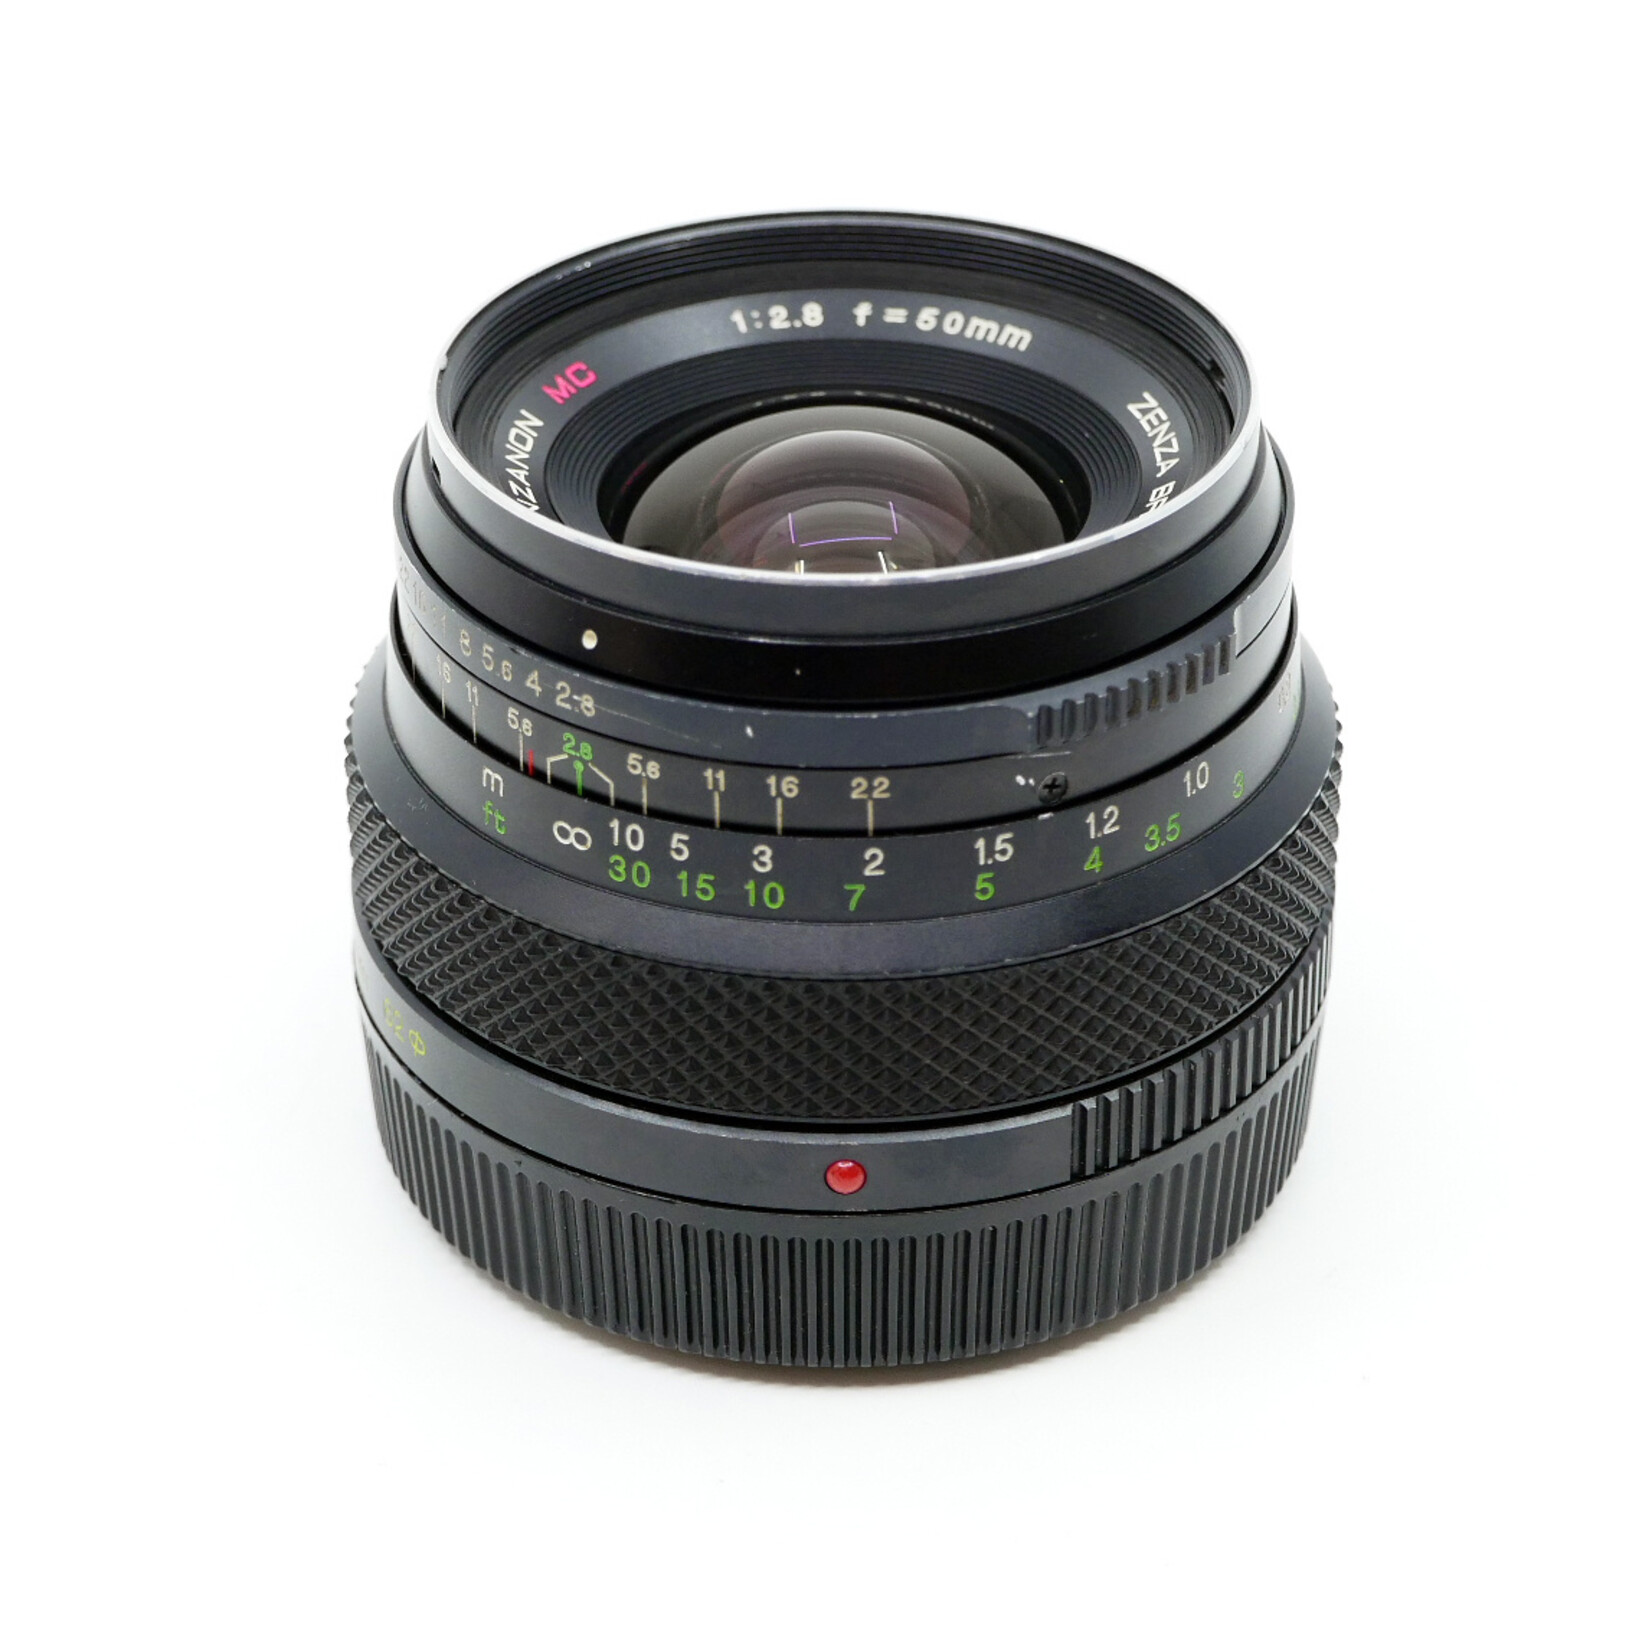 Bronica Bronica 50mm f/2.8 Zenzanon MC for ETR System (Used)